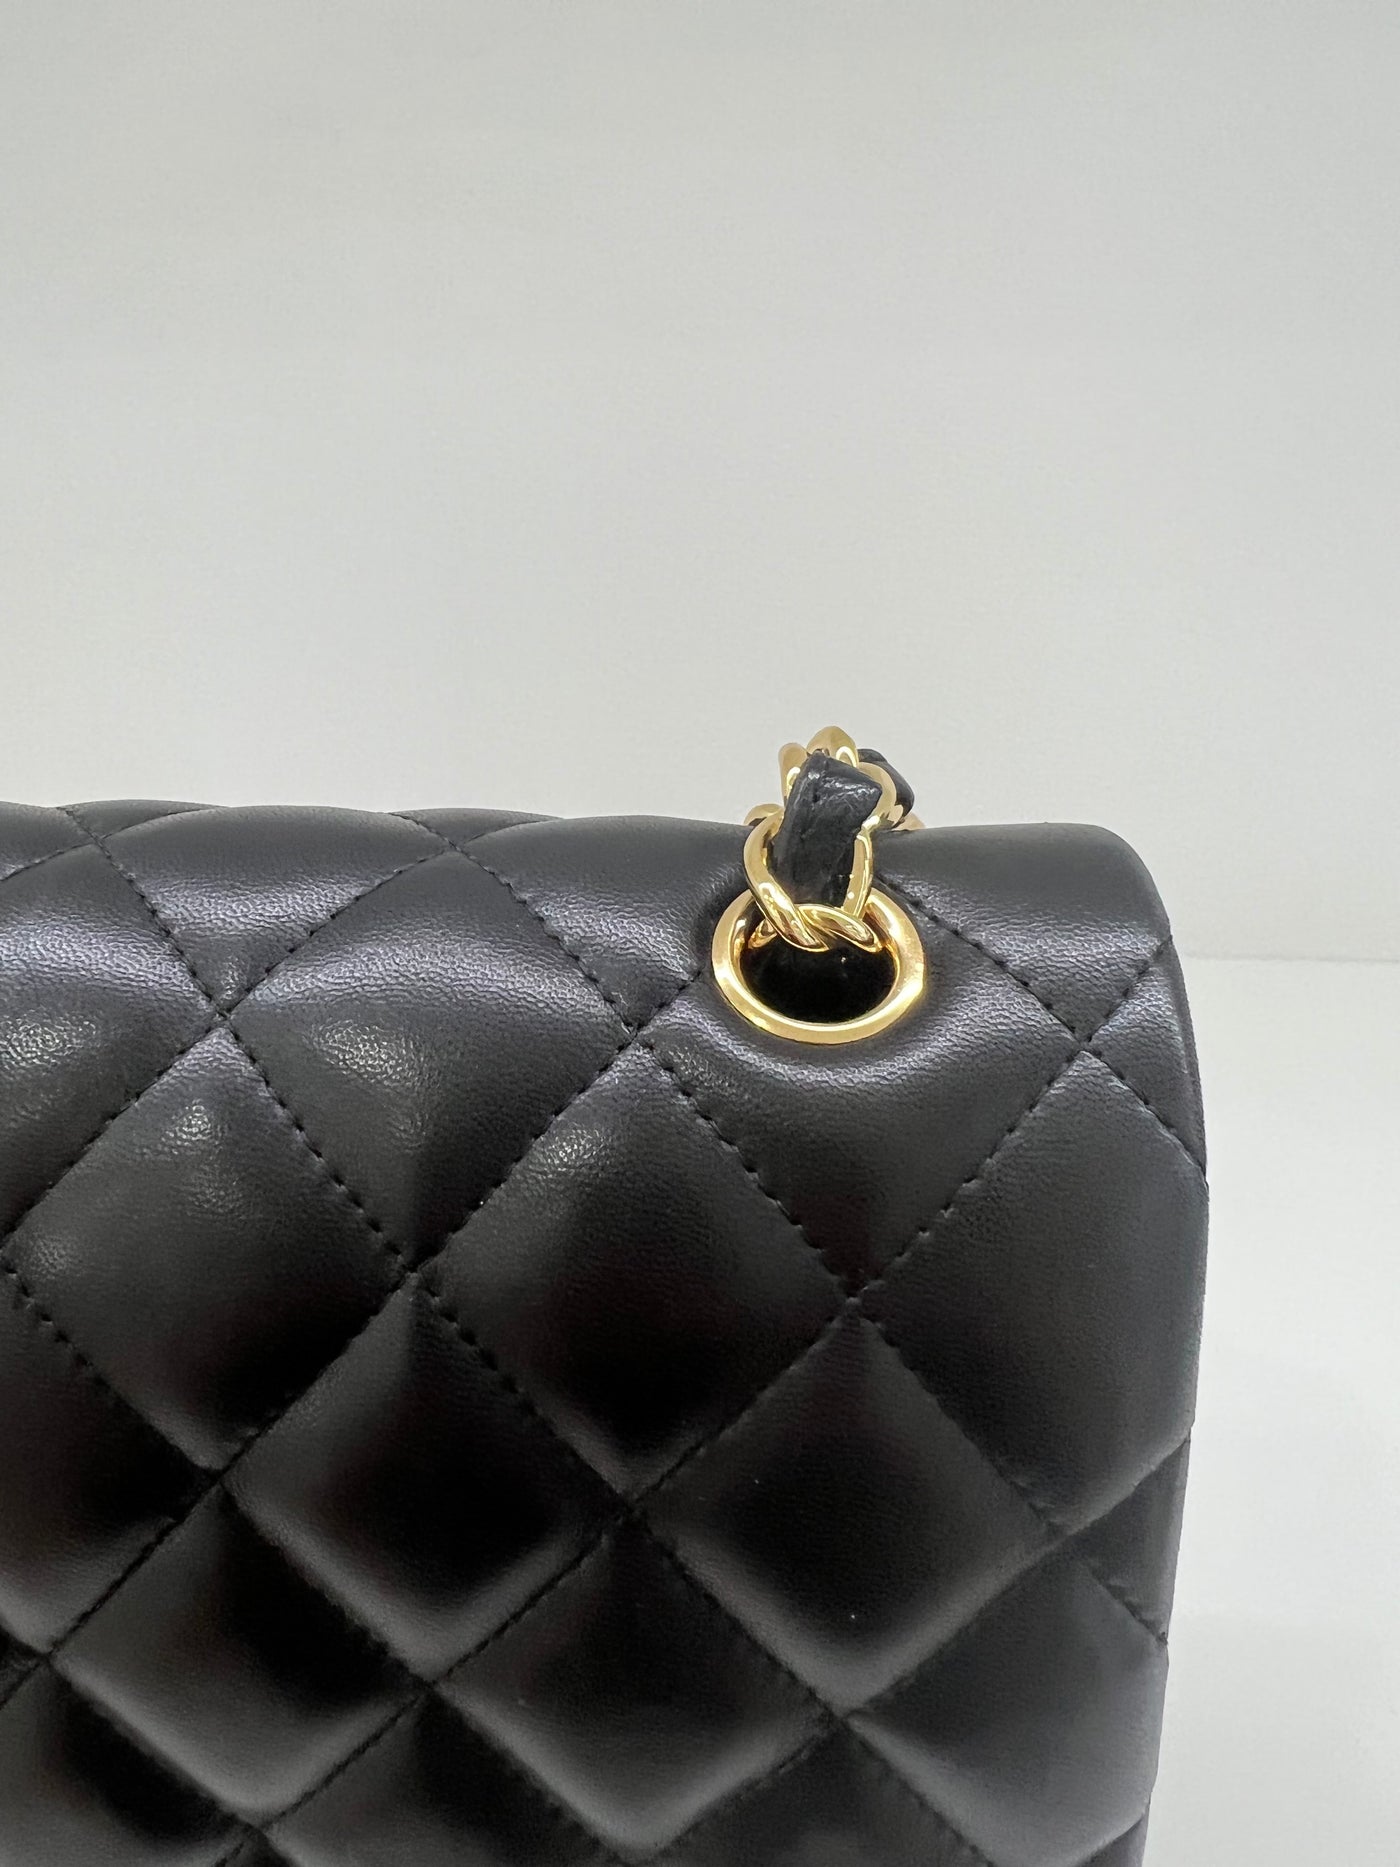 Chanel Large Classic Flap GHW - Lambskin Black - SOLD